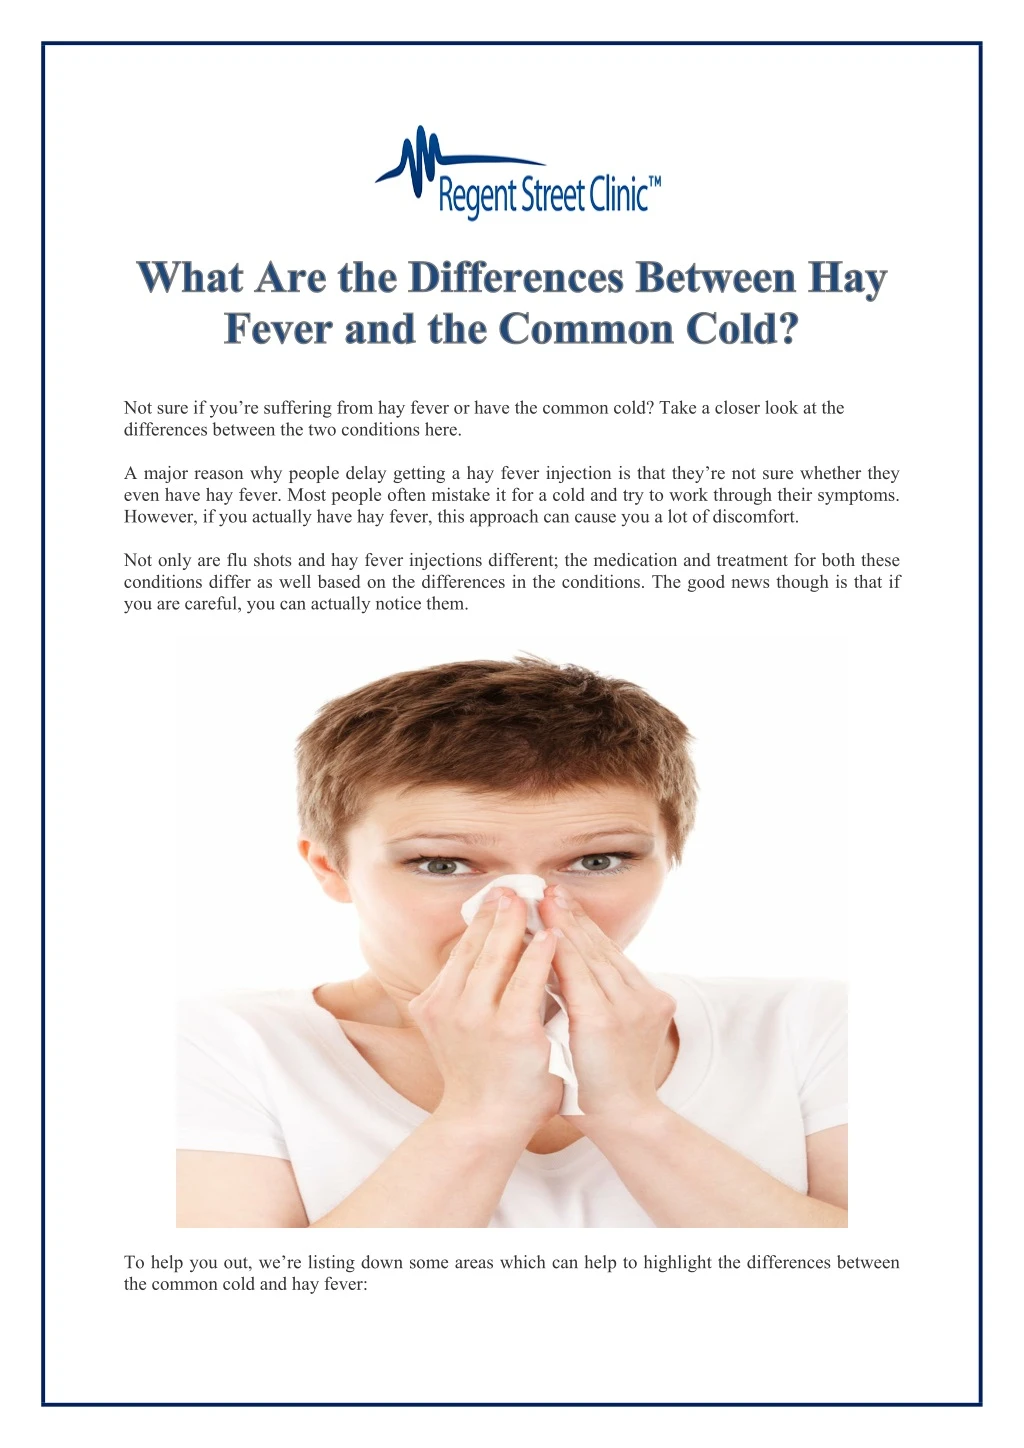 PPT What Are the Differences Between Hay Fever and the Common Cold